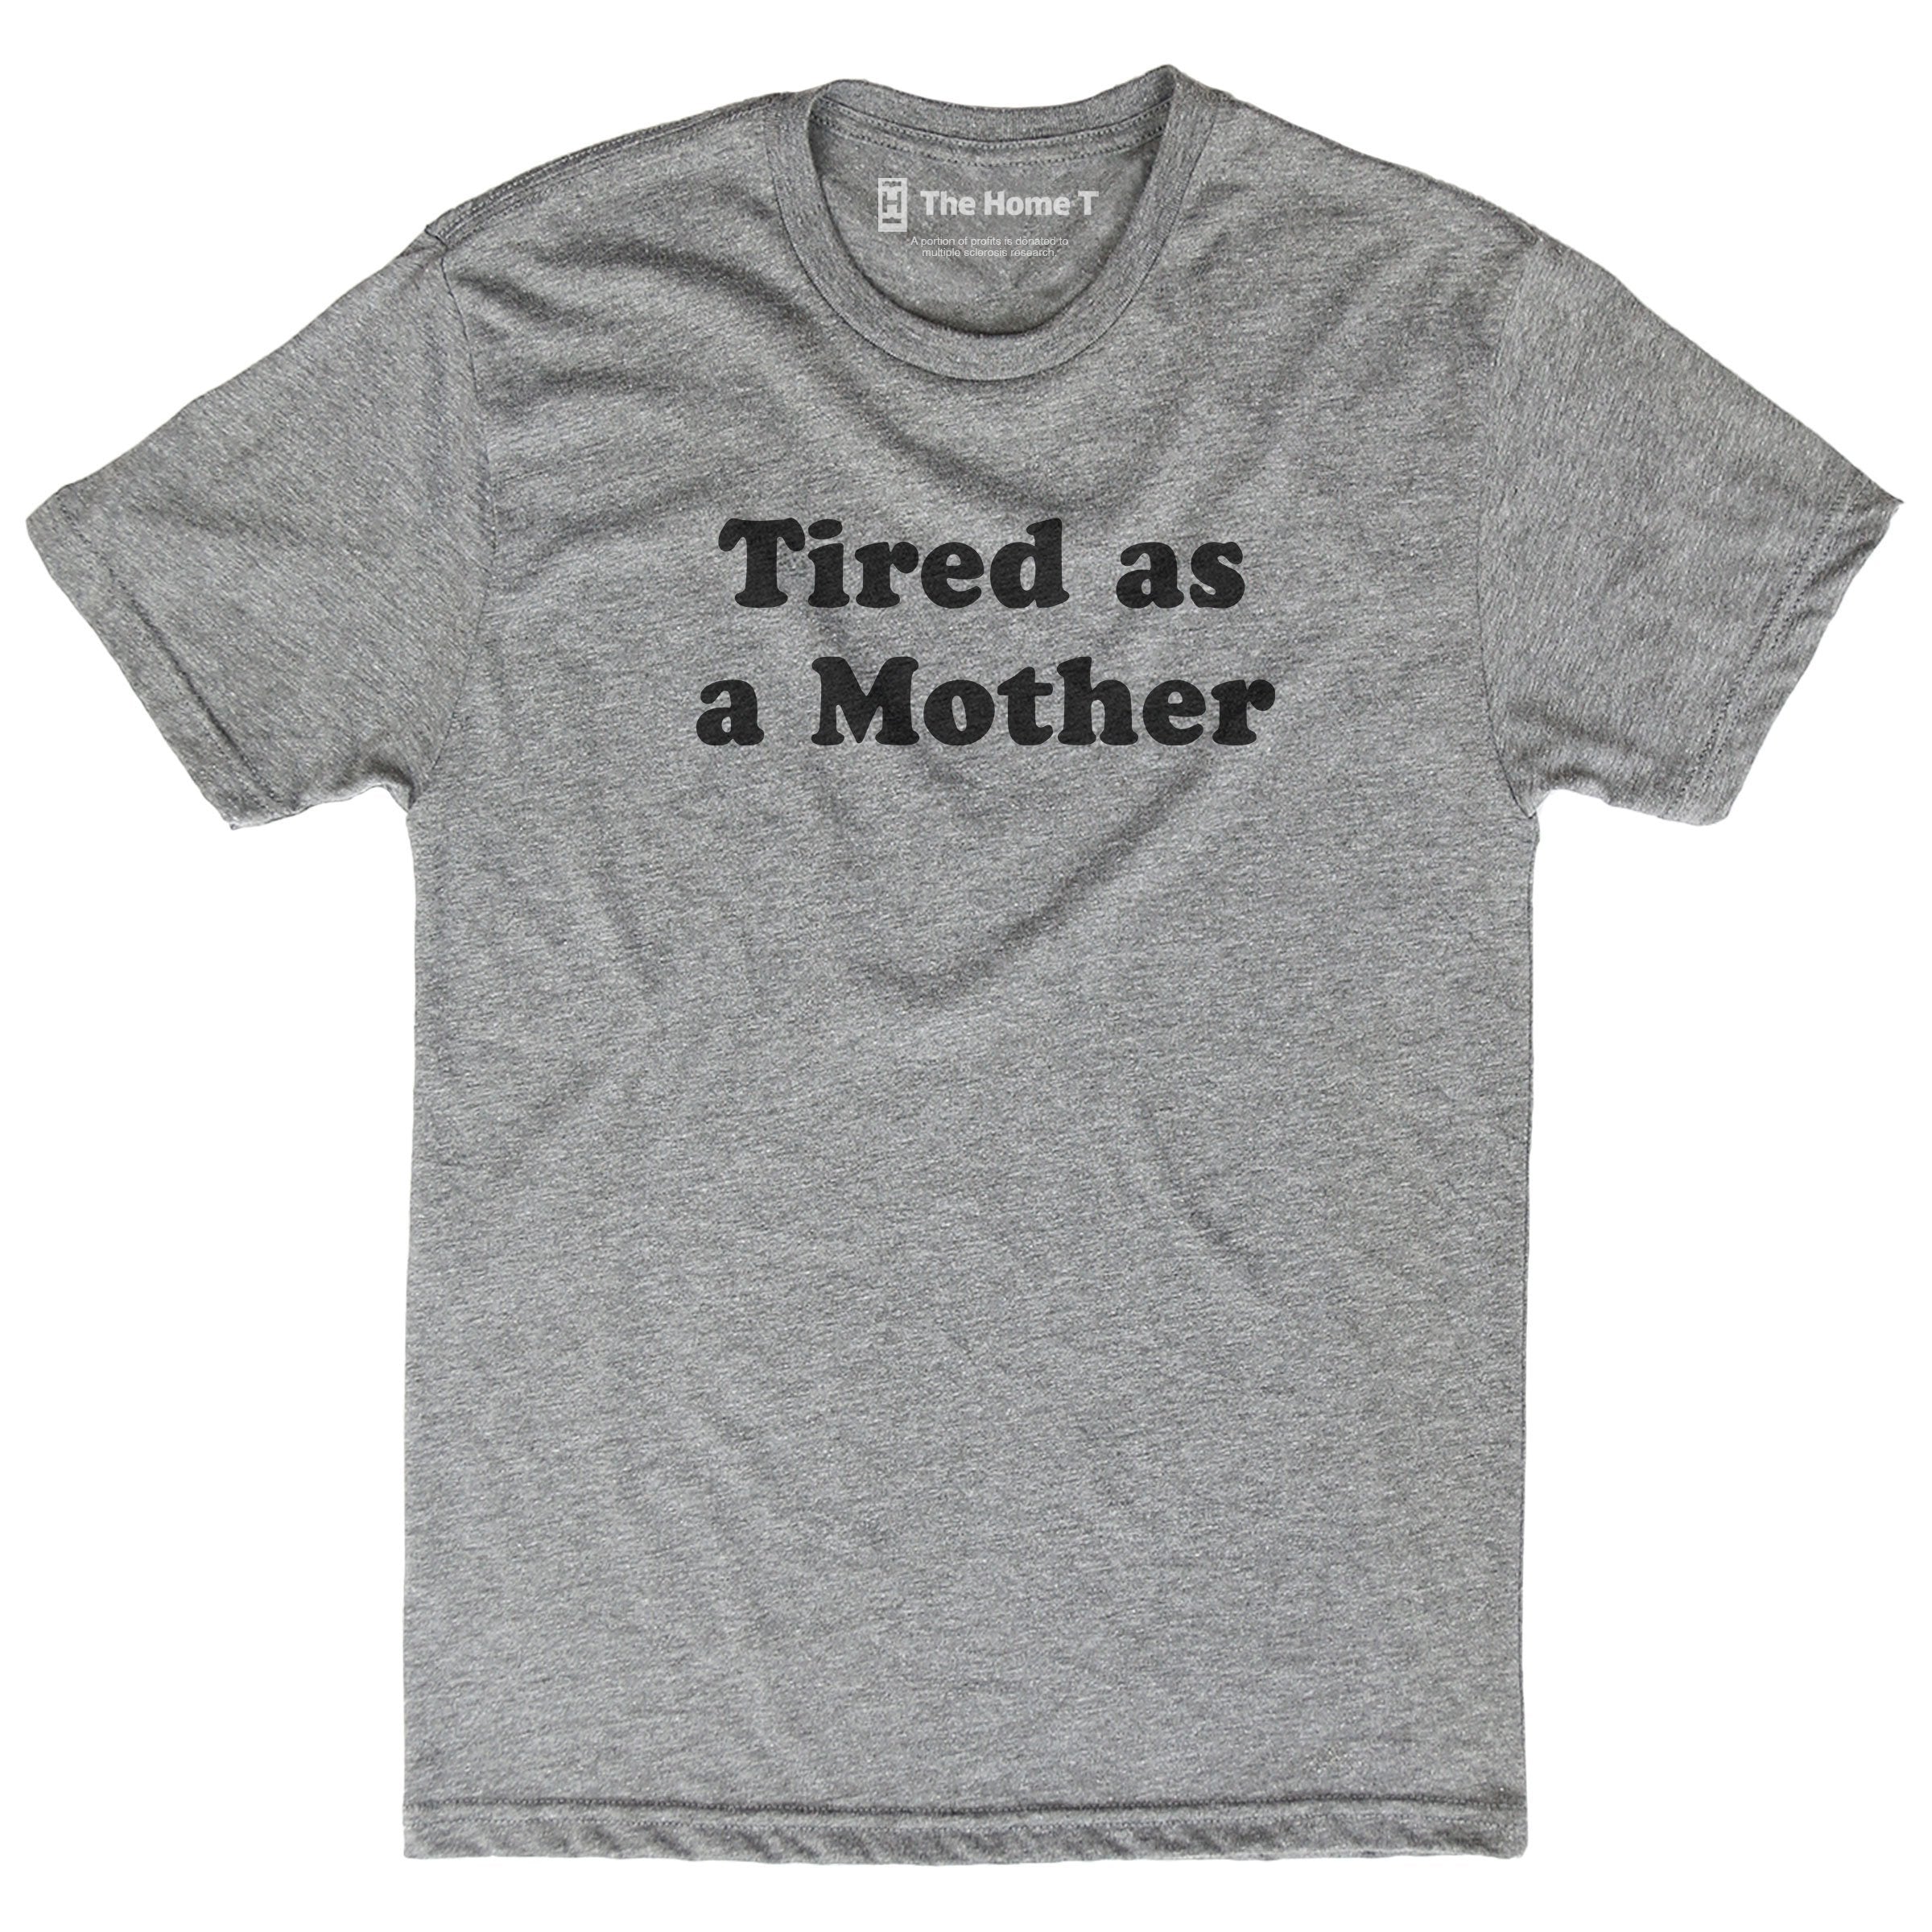 Tired as a mother athletic grey crewneck